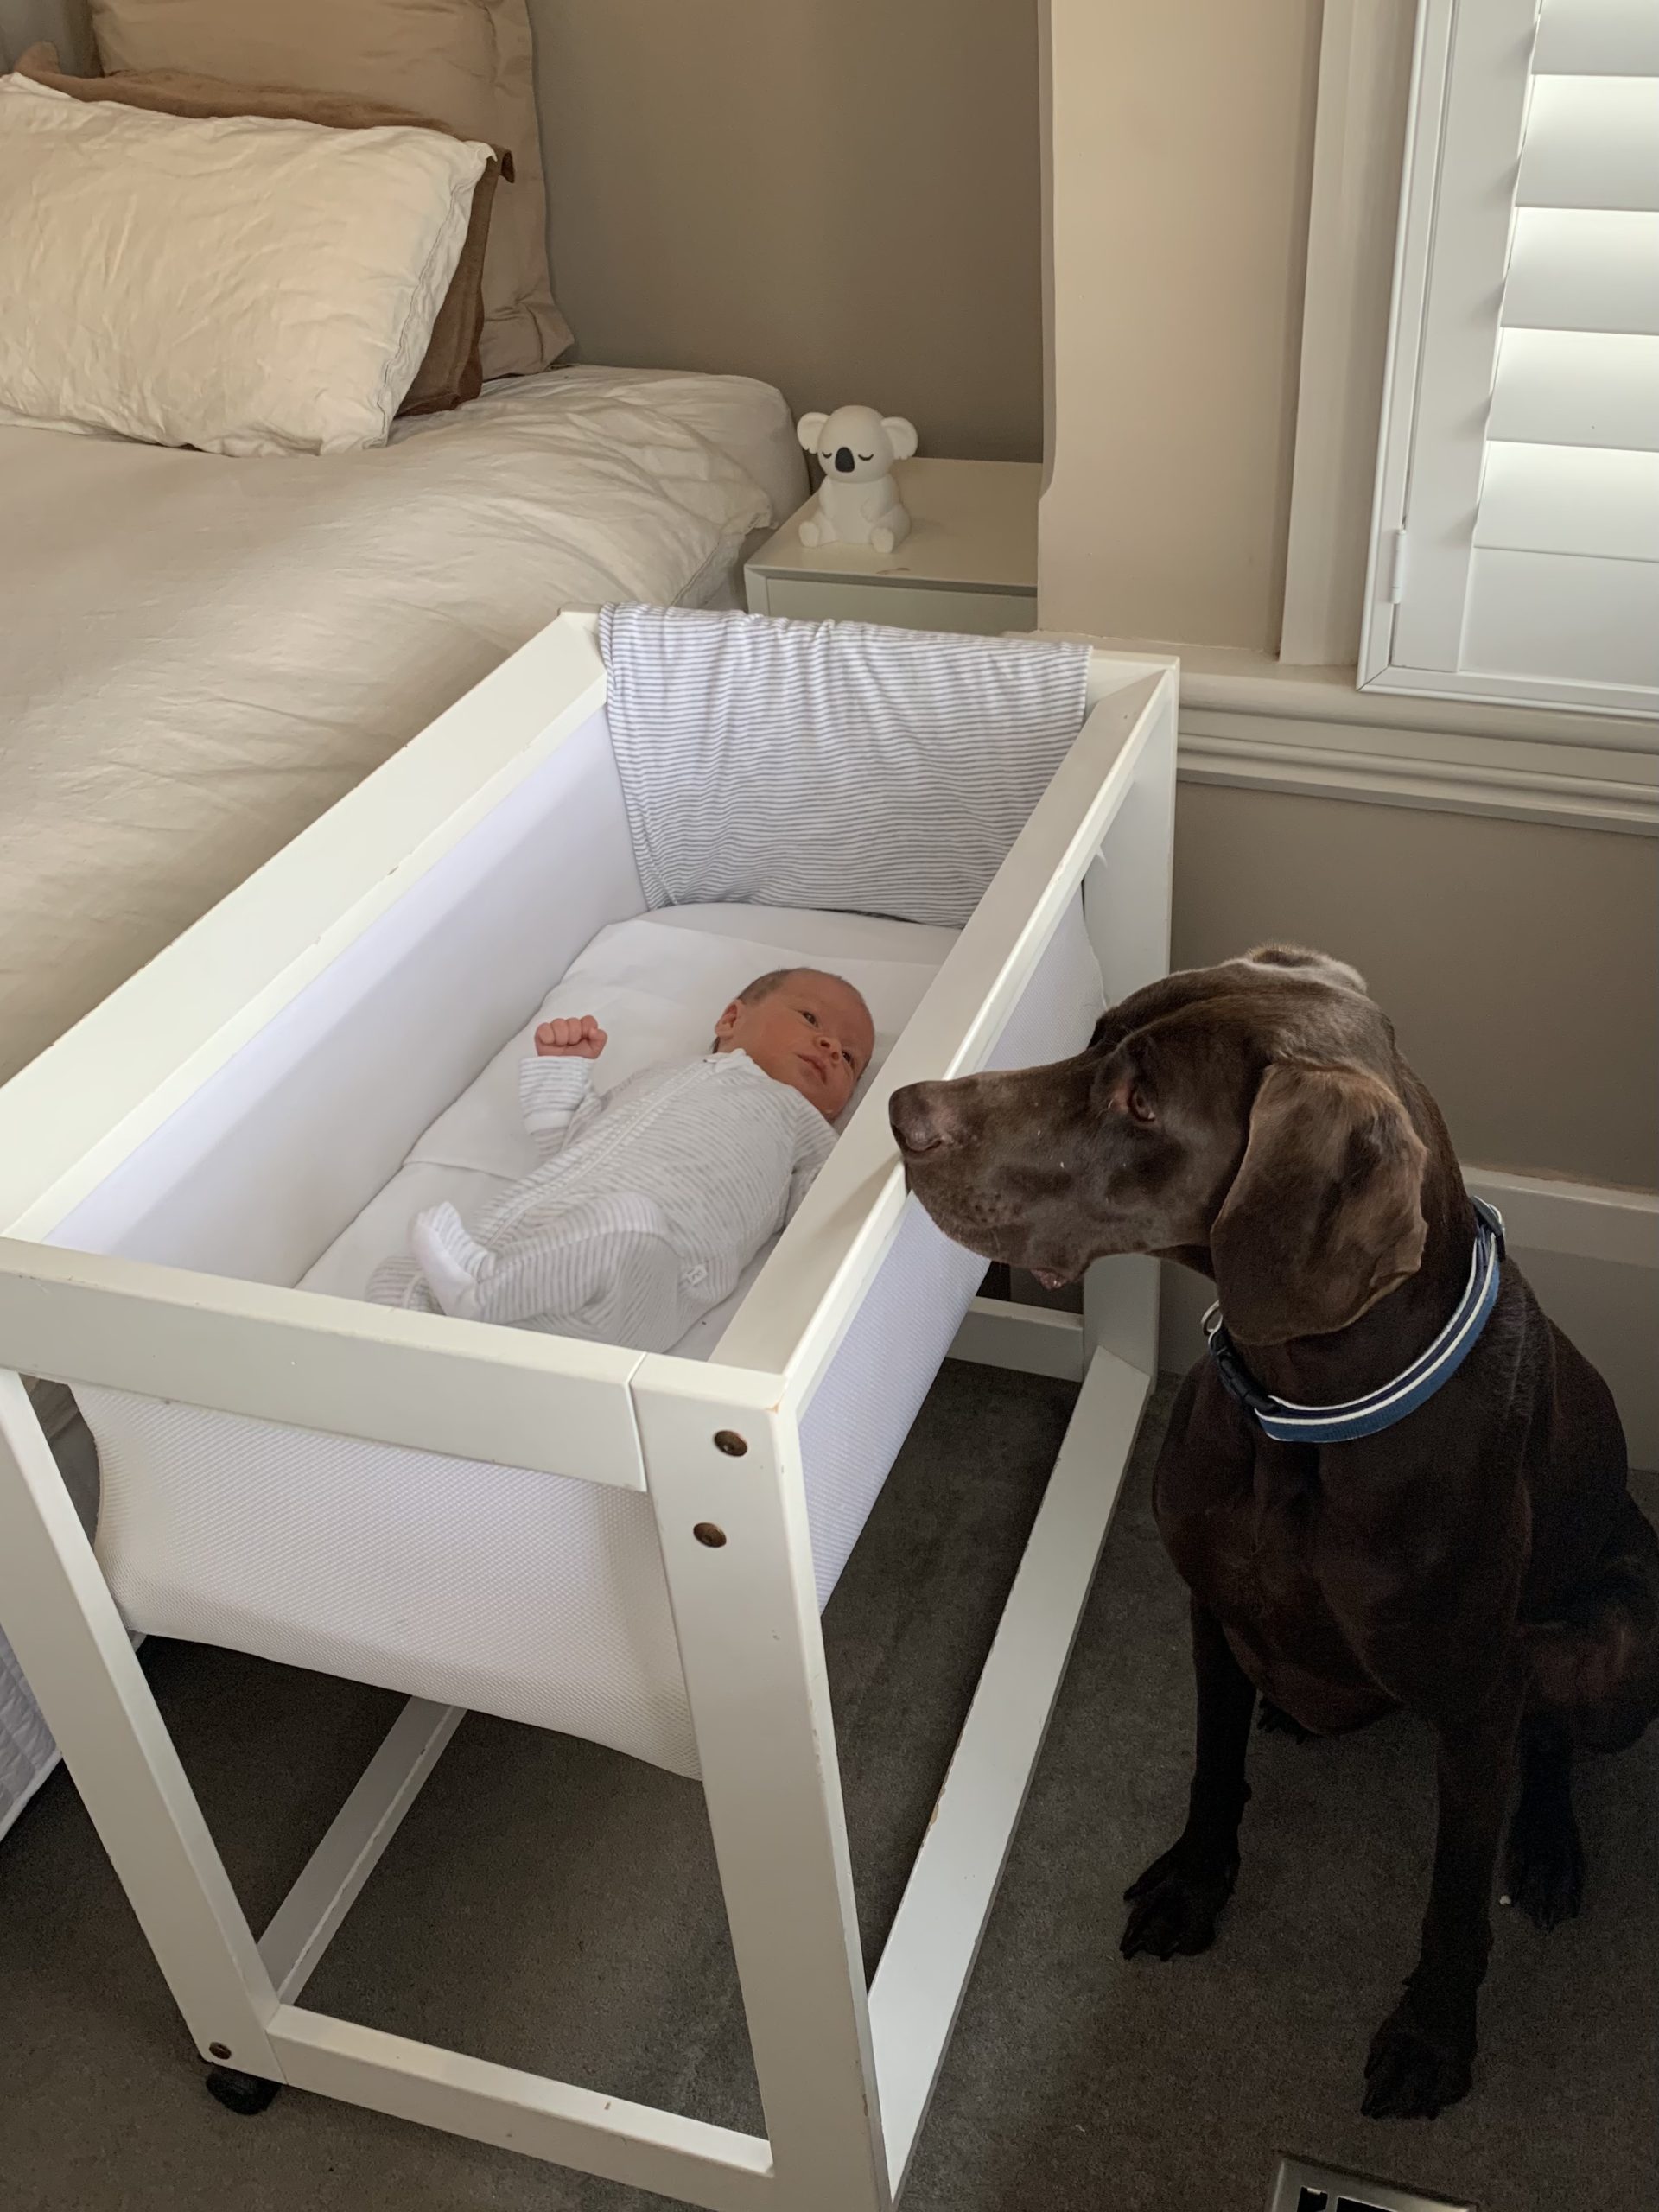 A dog observing a baby